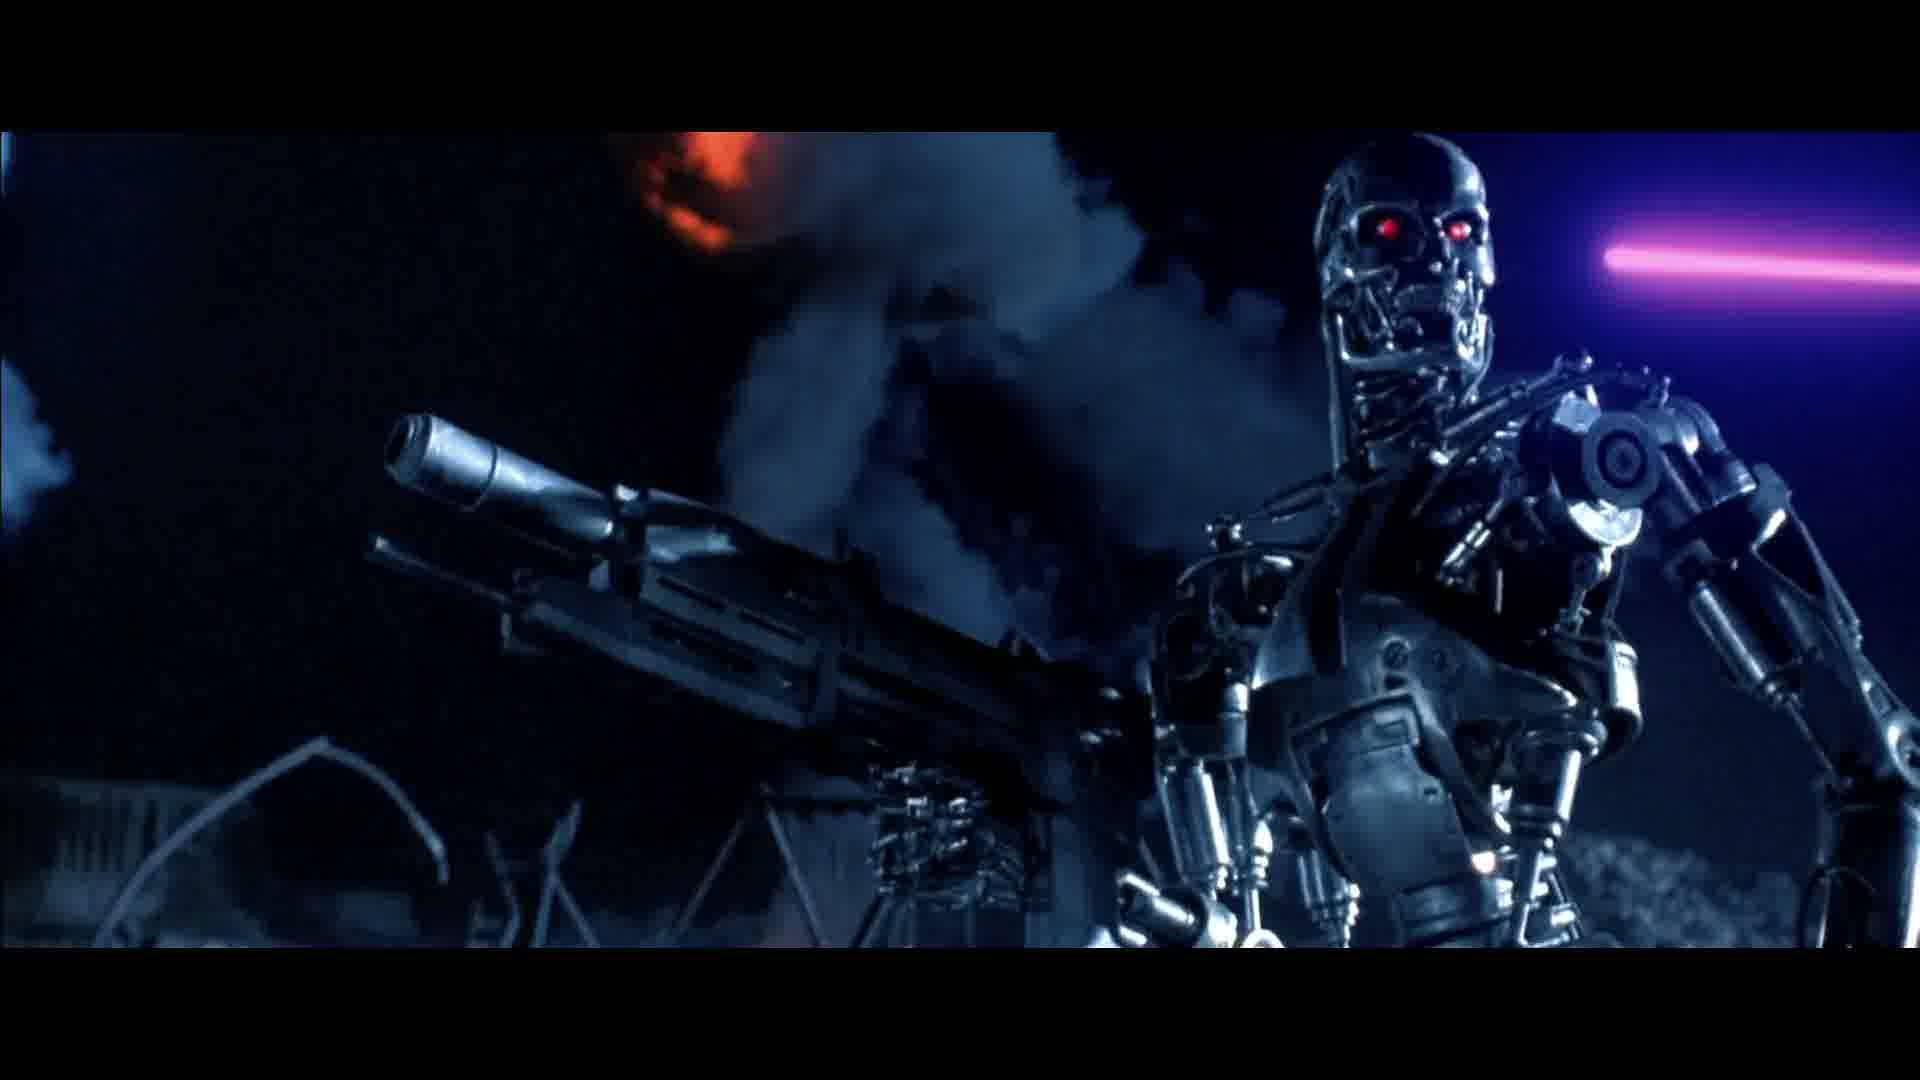 Terminator Wallpaper High Quality And Resolution